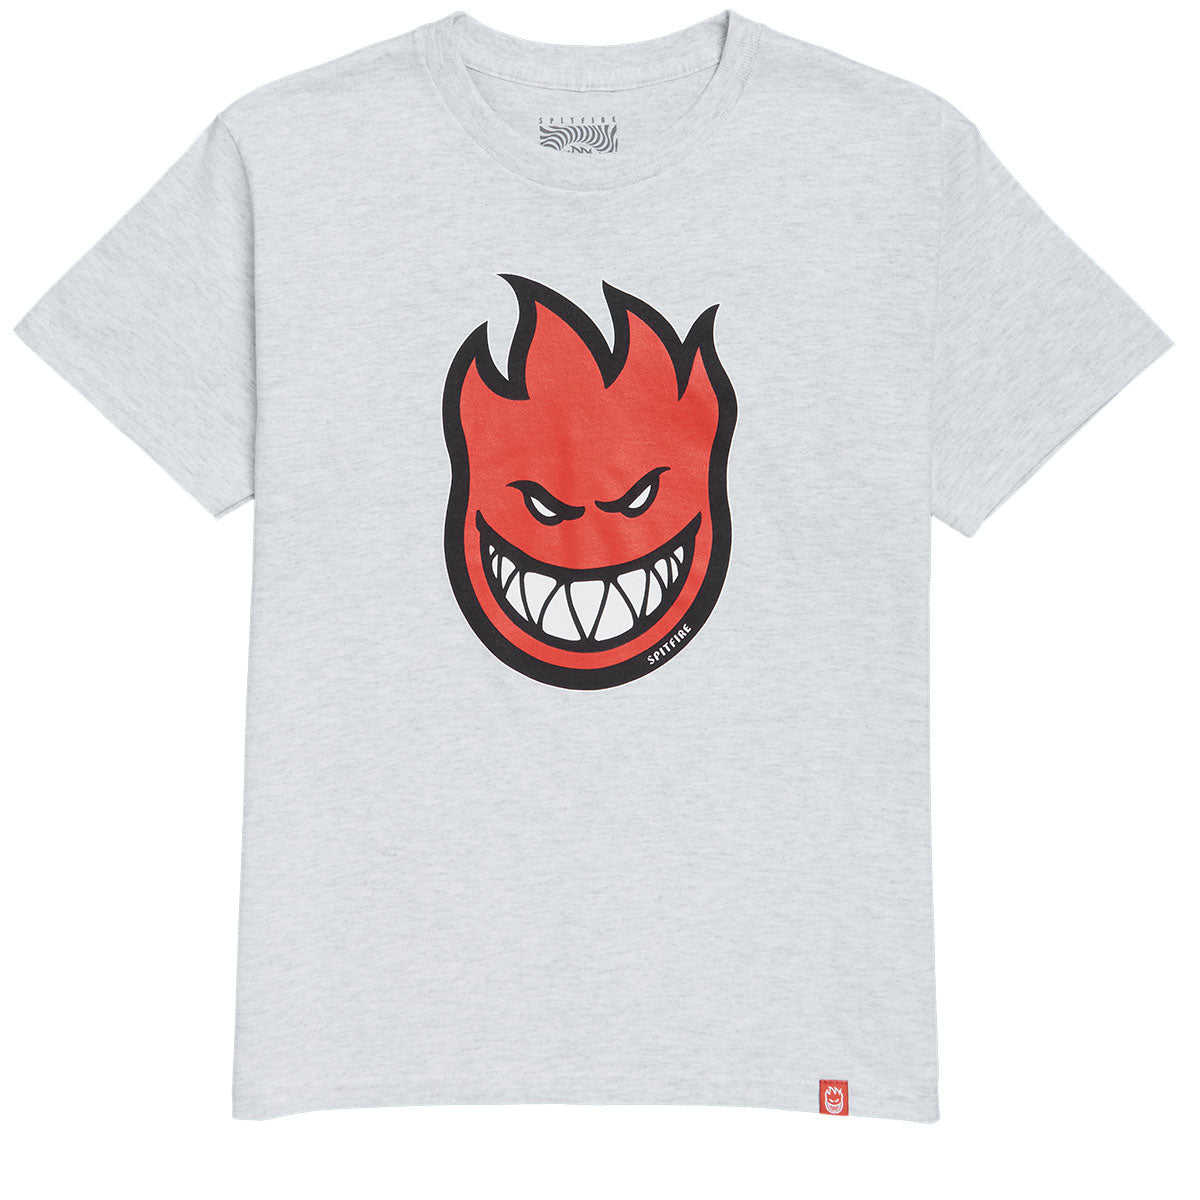 Spitfire Youth Bighead Fill T-Shirt - Ash/Red/Black/White image 1